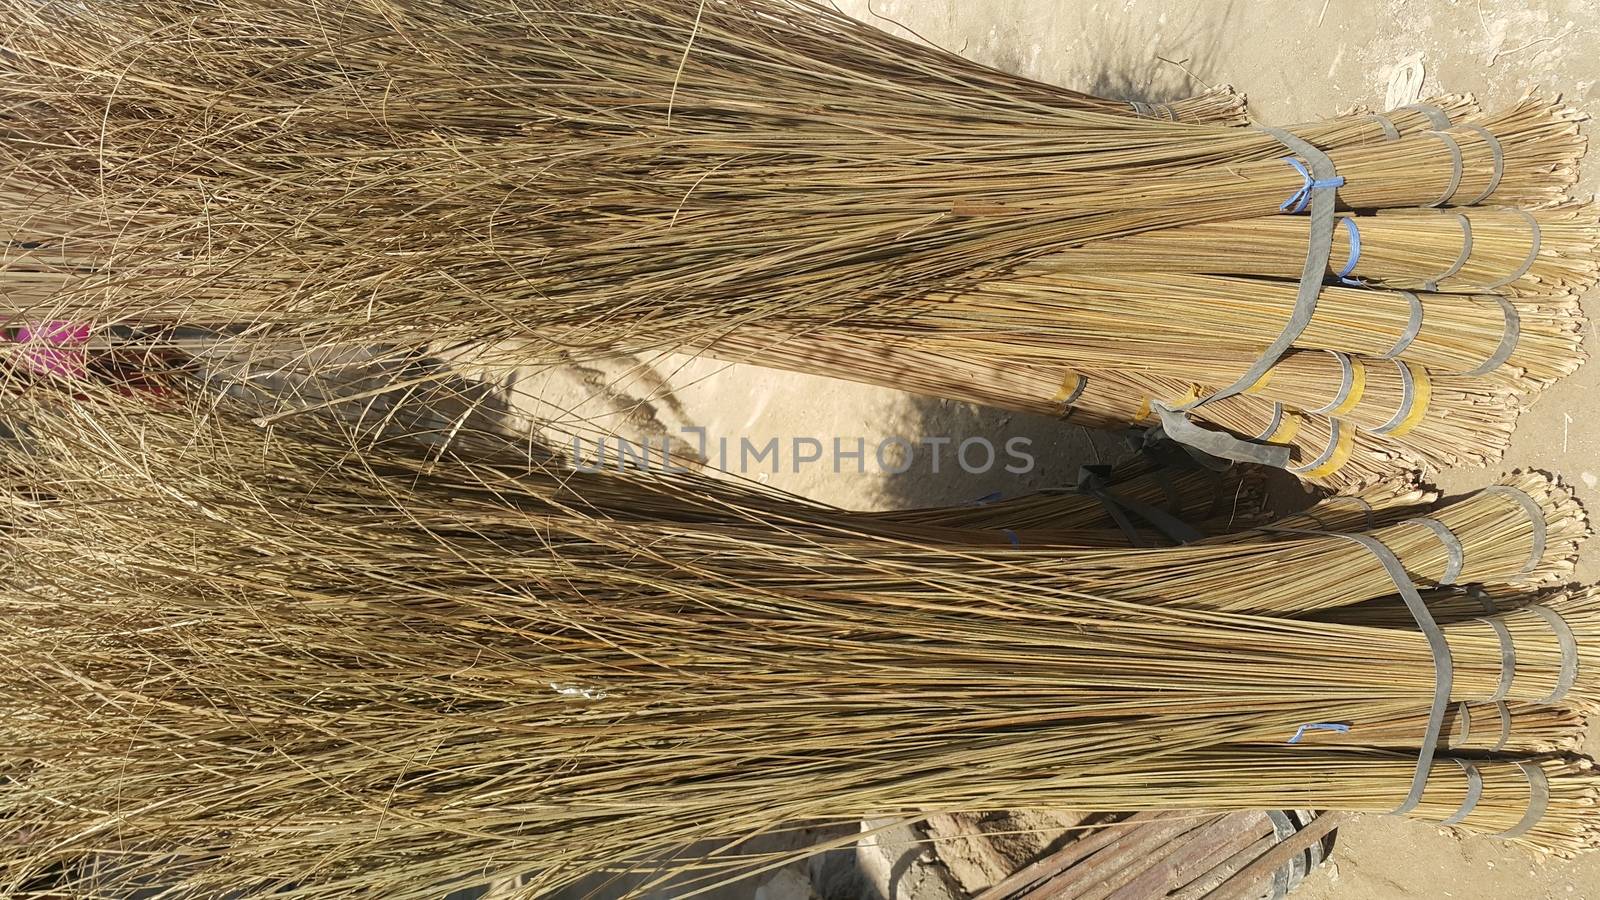 Old style broom used for housekeeping in rural area in Asian countries. by Photochowk